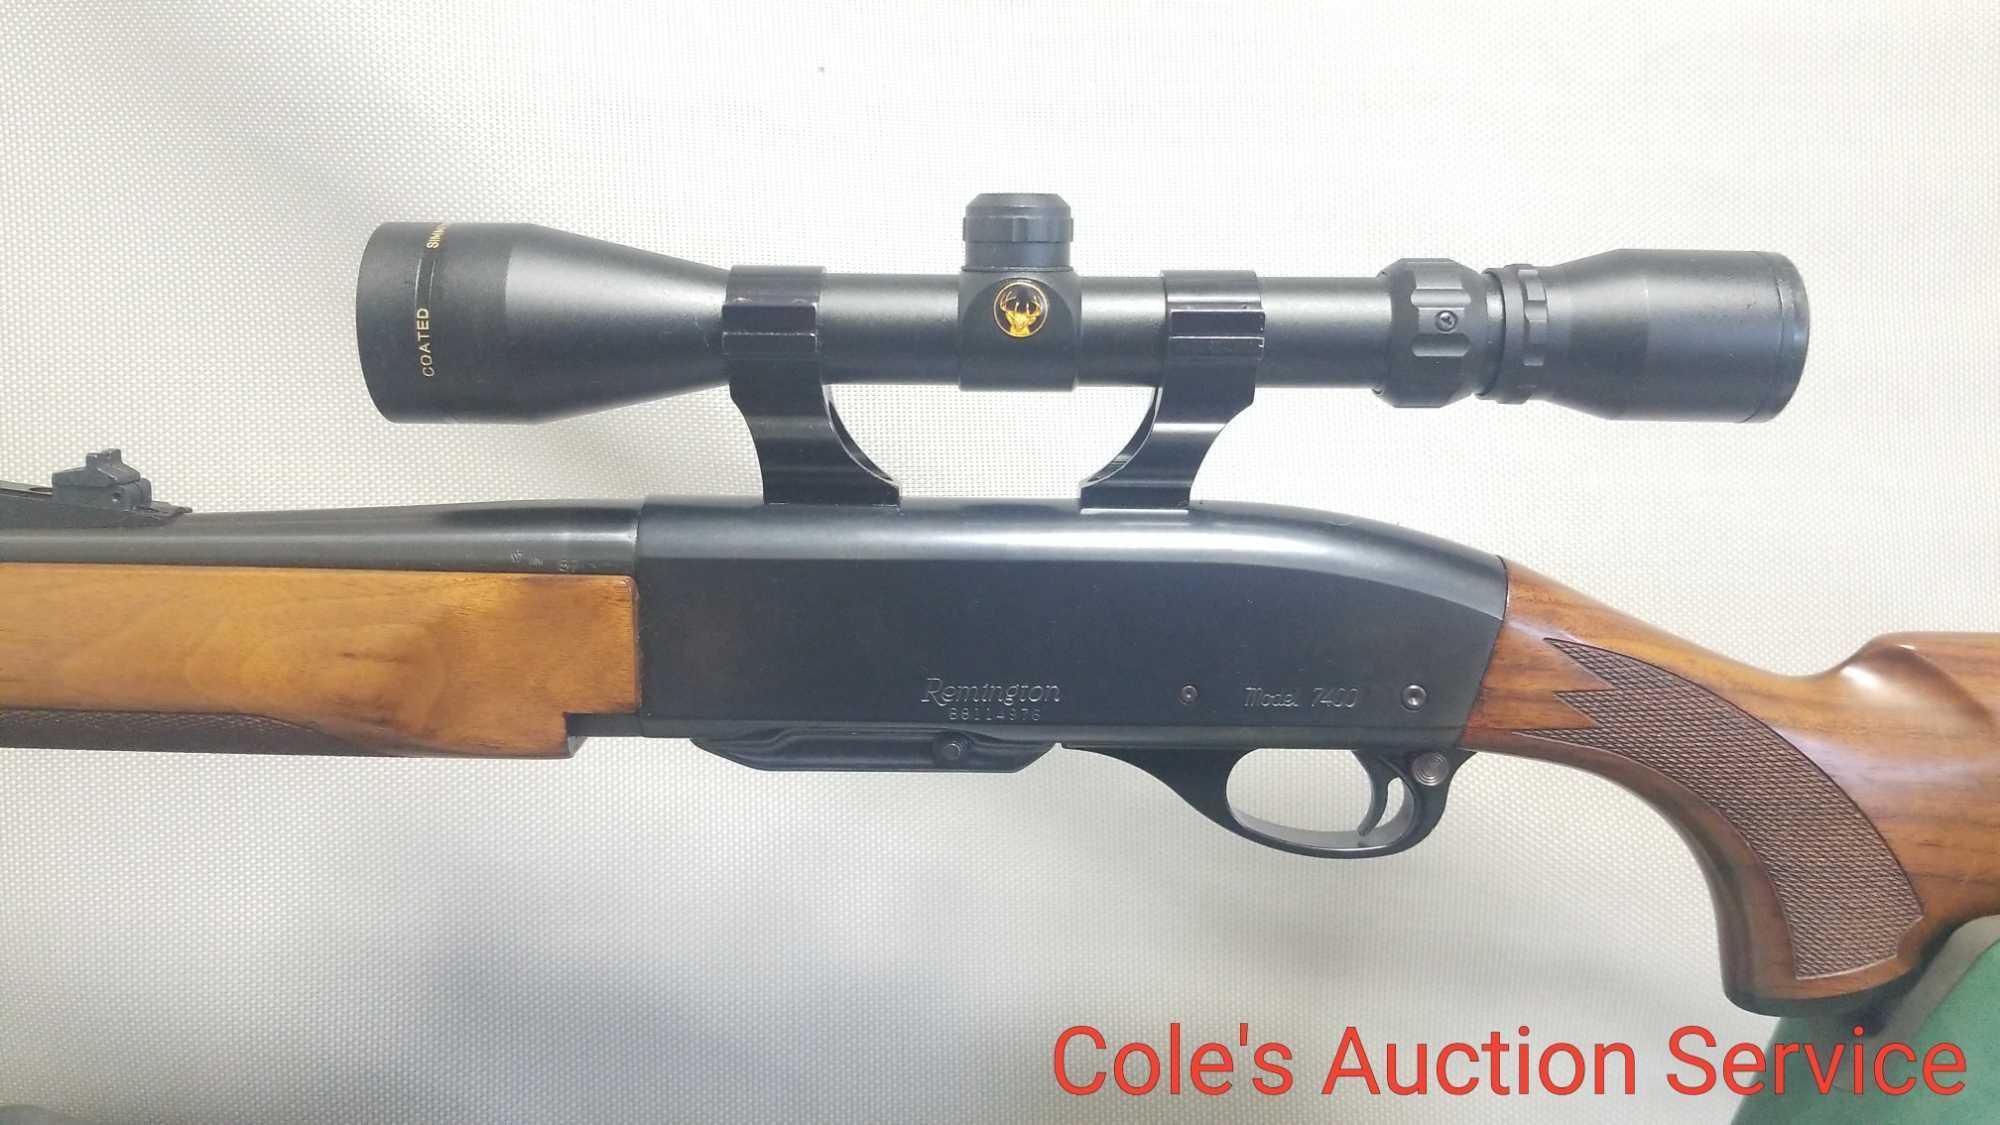 Remington model 7400 30.06 Cal rifle in beautiful condition. Includes Simmons 3 x 9 scope. Serial